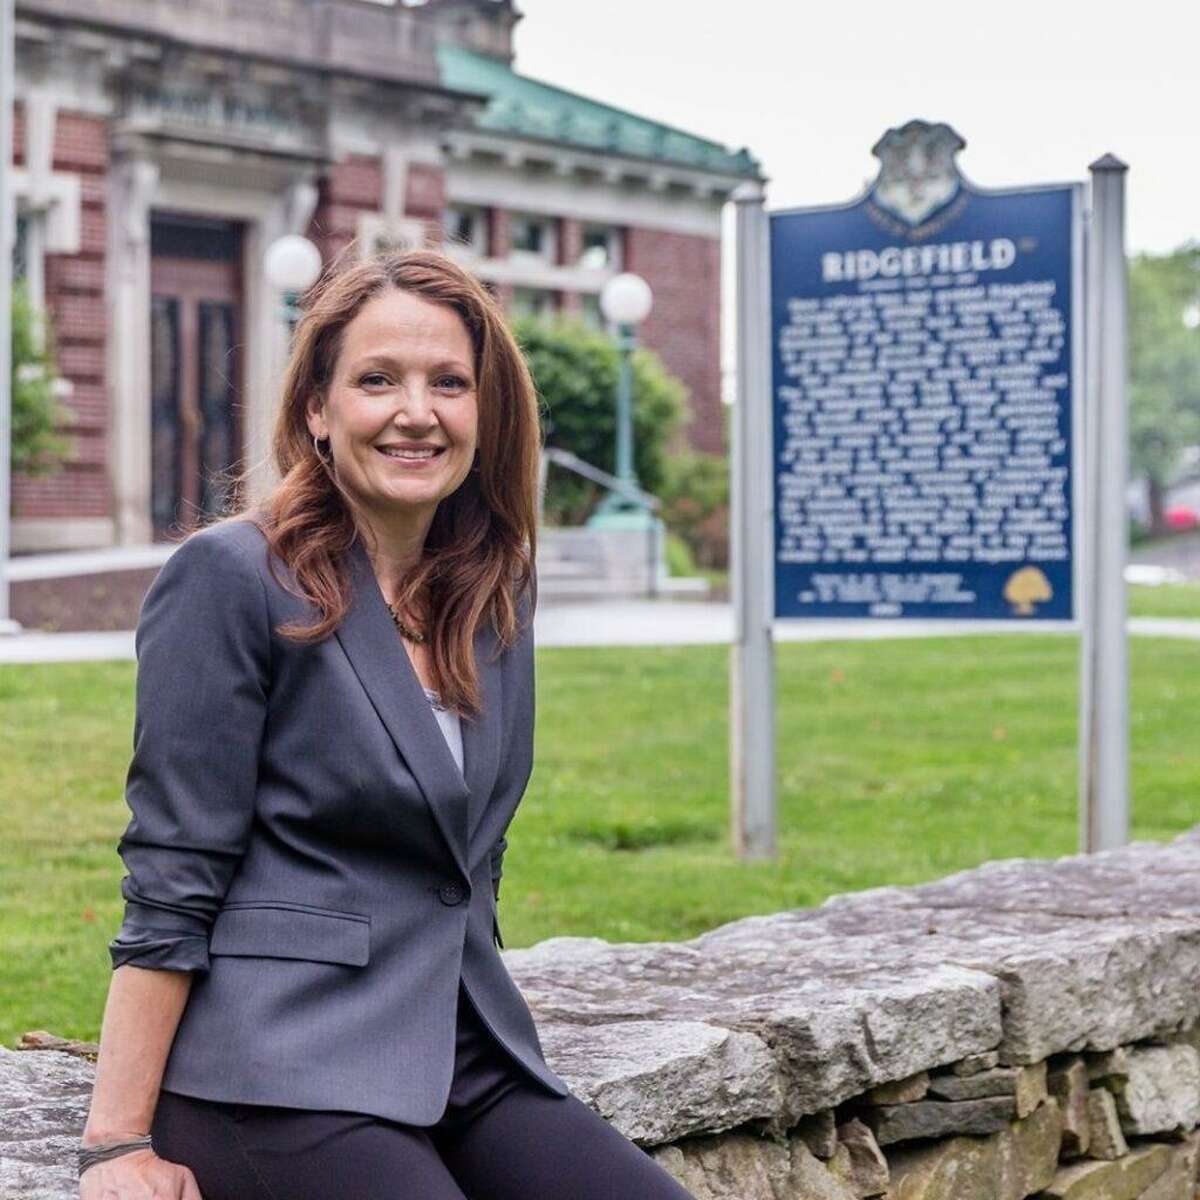 State Rep. Aimee Berger-Girvalo last week announced her reelection campaign to represent Ridgefield in the General Assembly in Hartford.